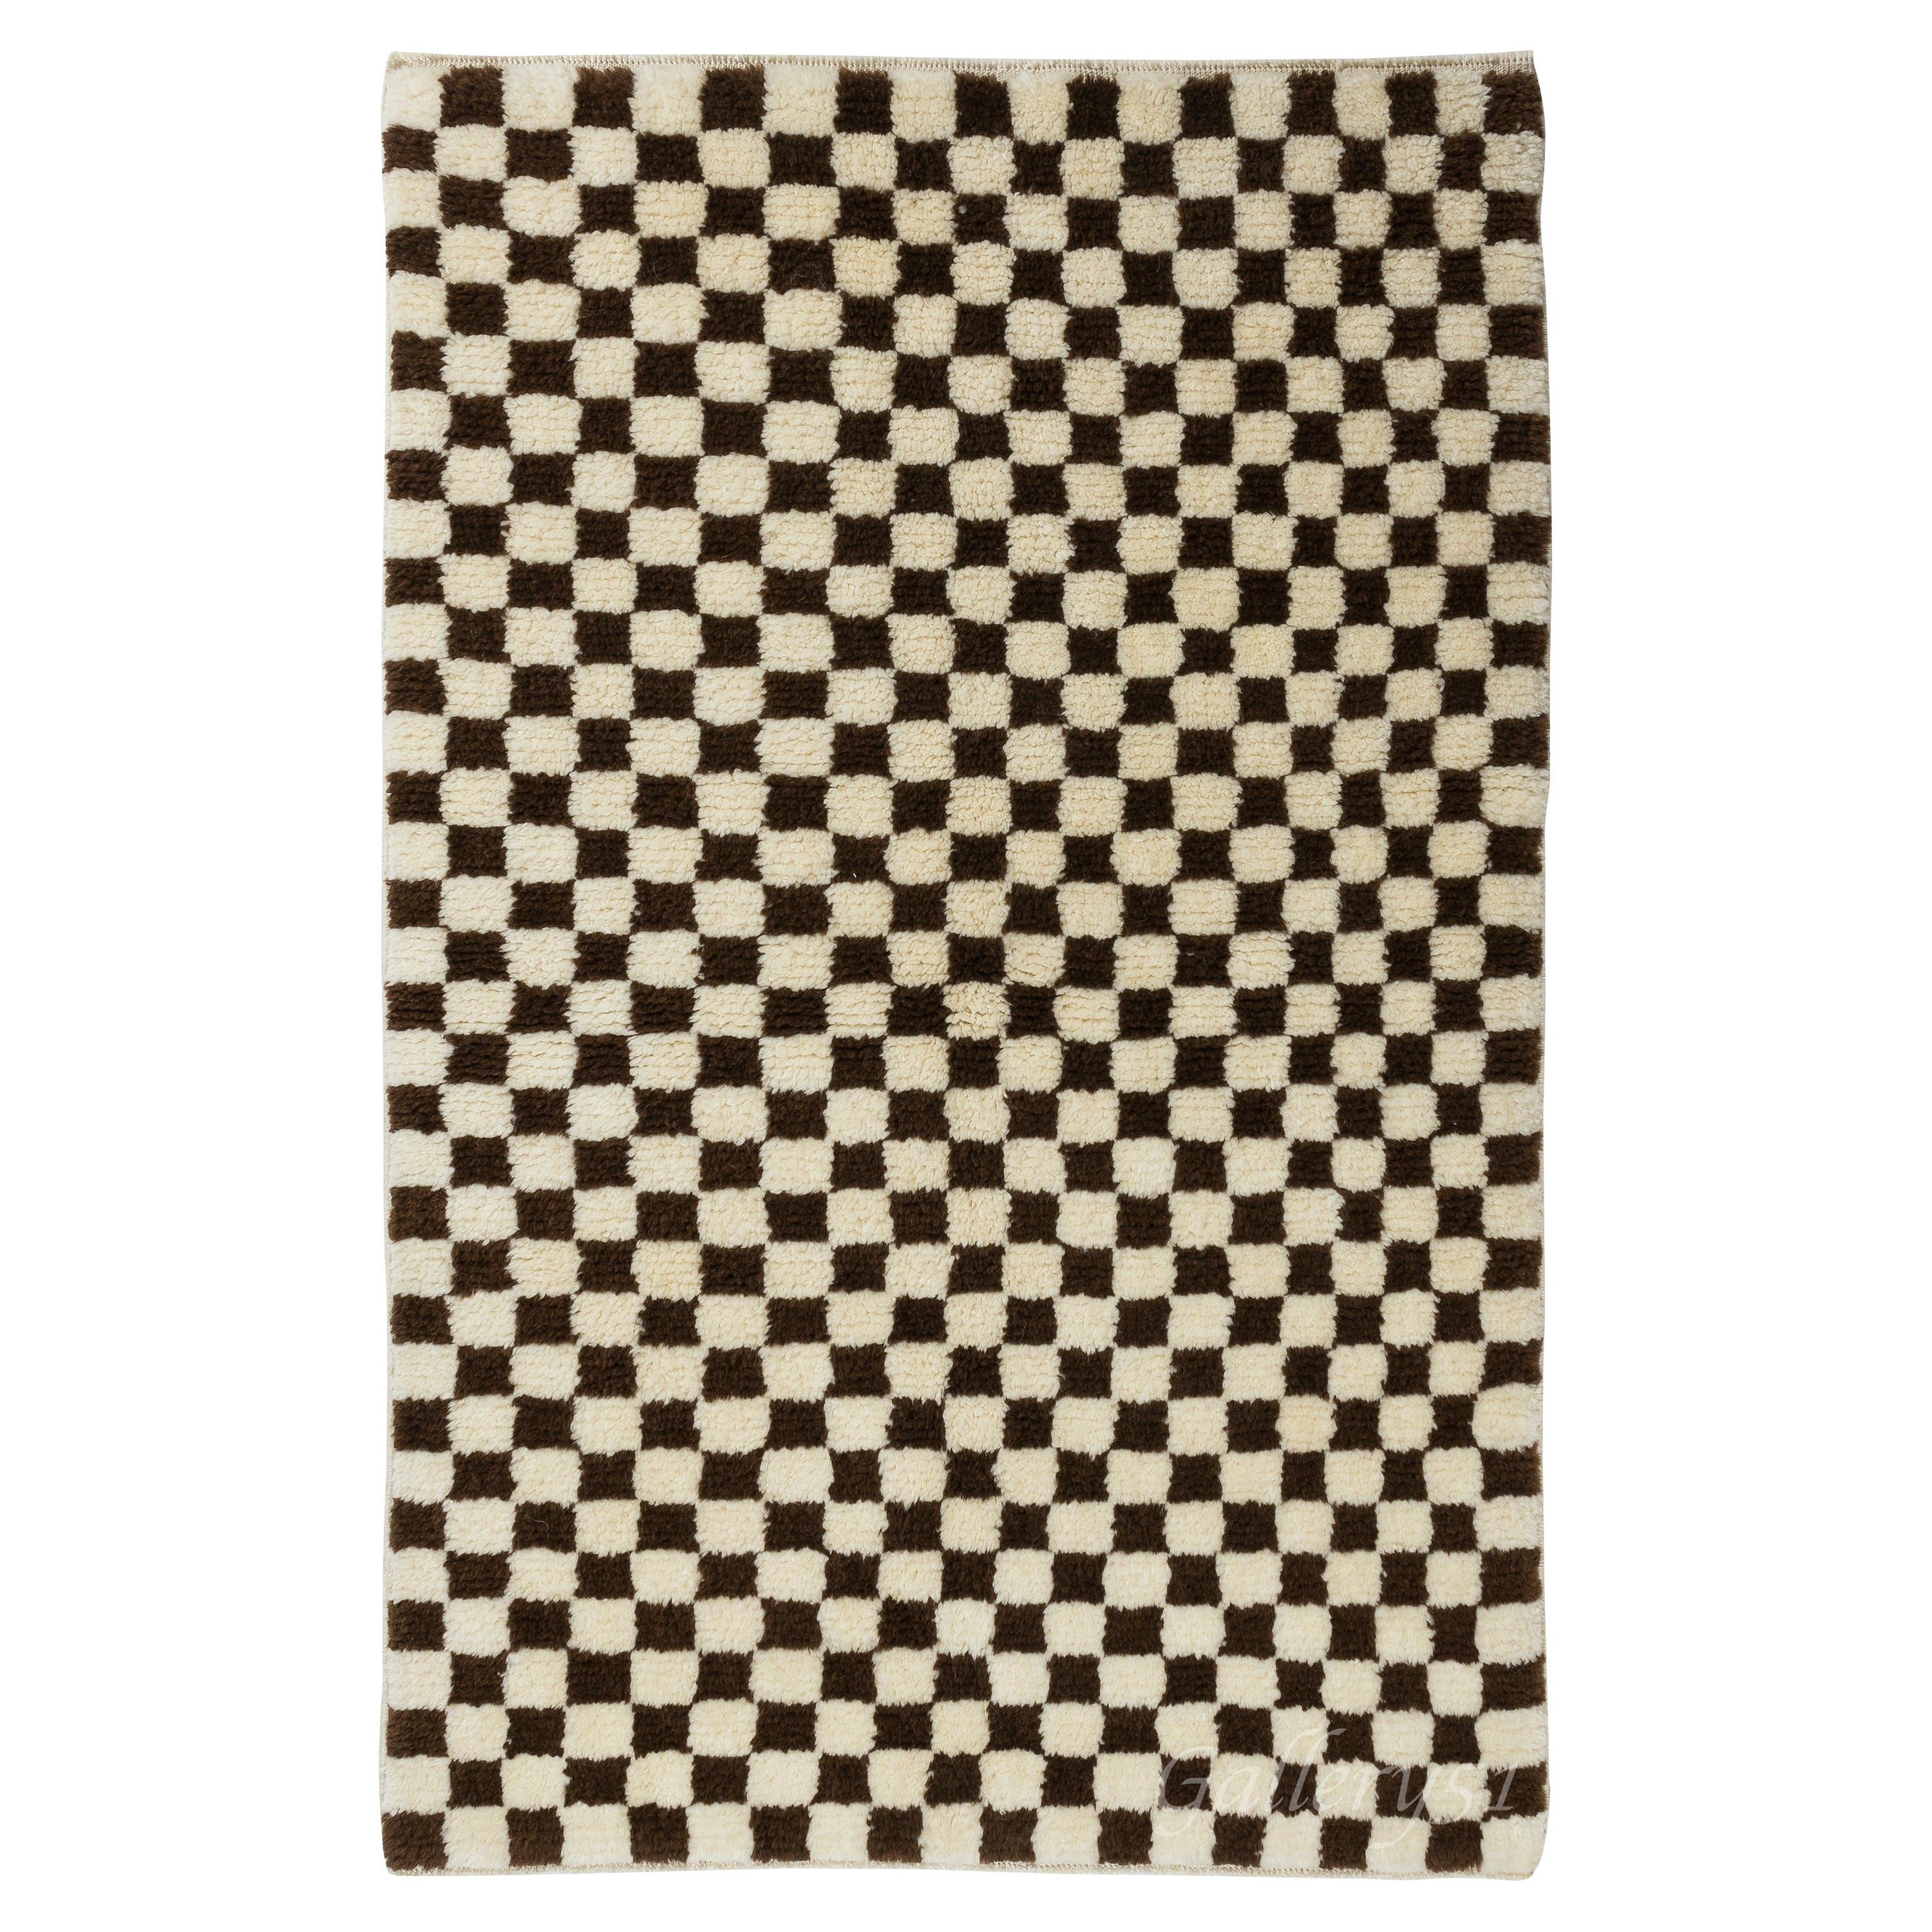 4x6 ft Custom Handmade Tulu Rug, All Wool. New Checkered Design in Brown & Ivory For Sale